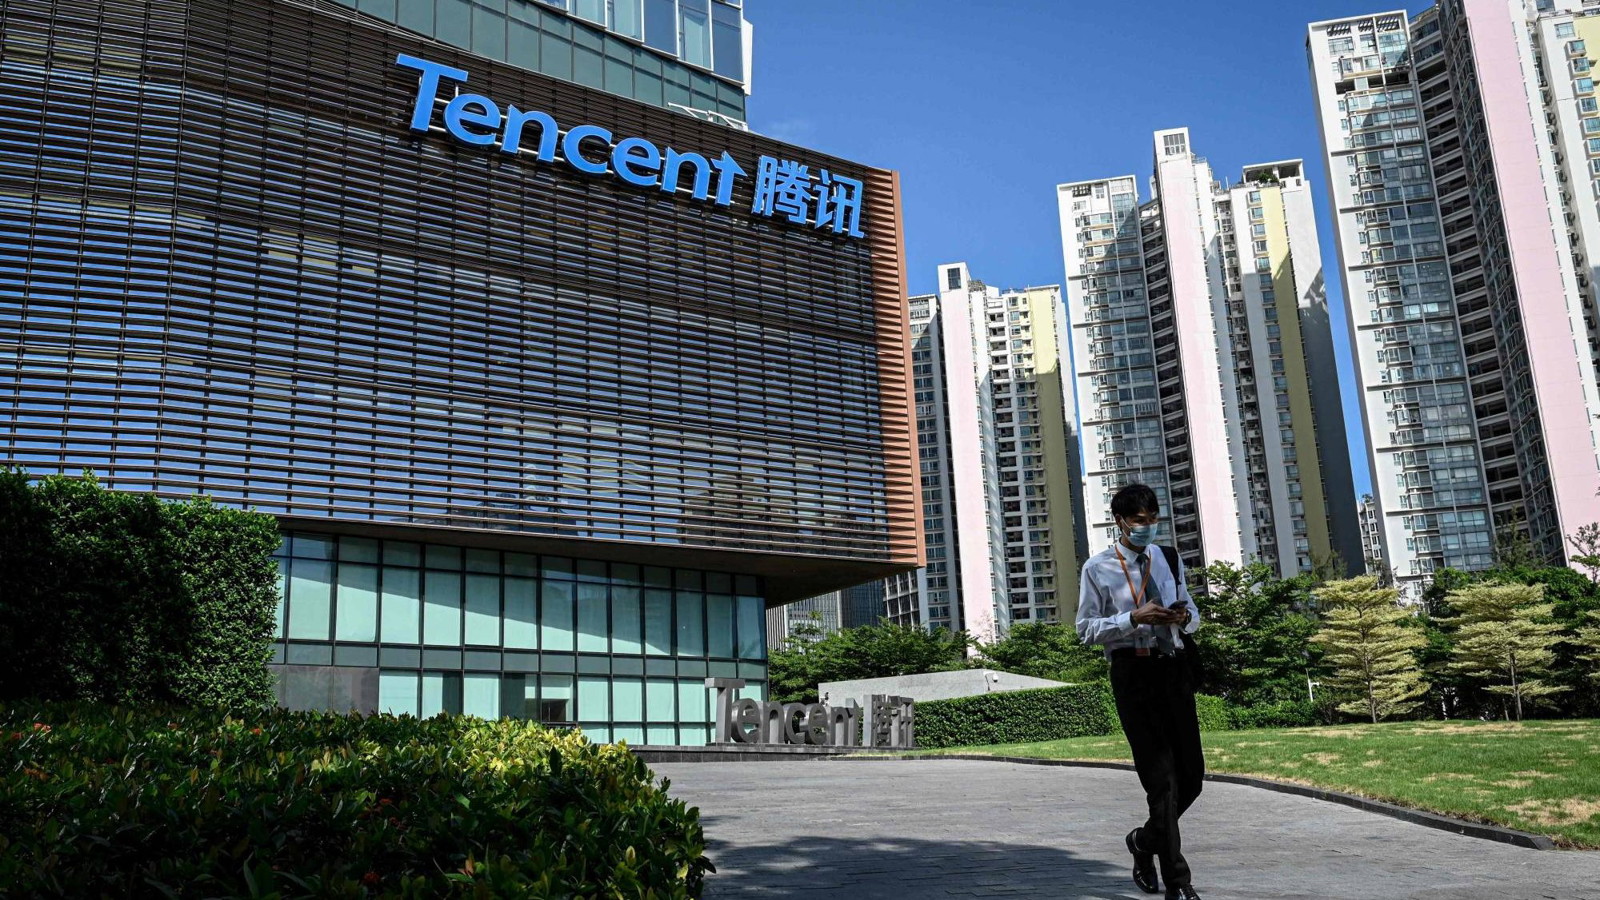 Tencent is not a stranger in the gaming industry.